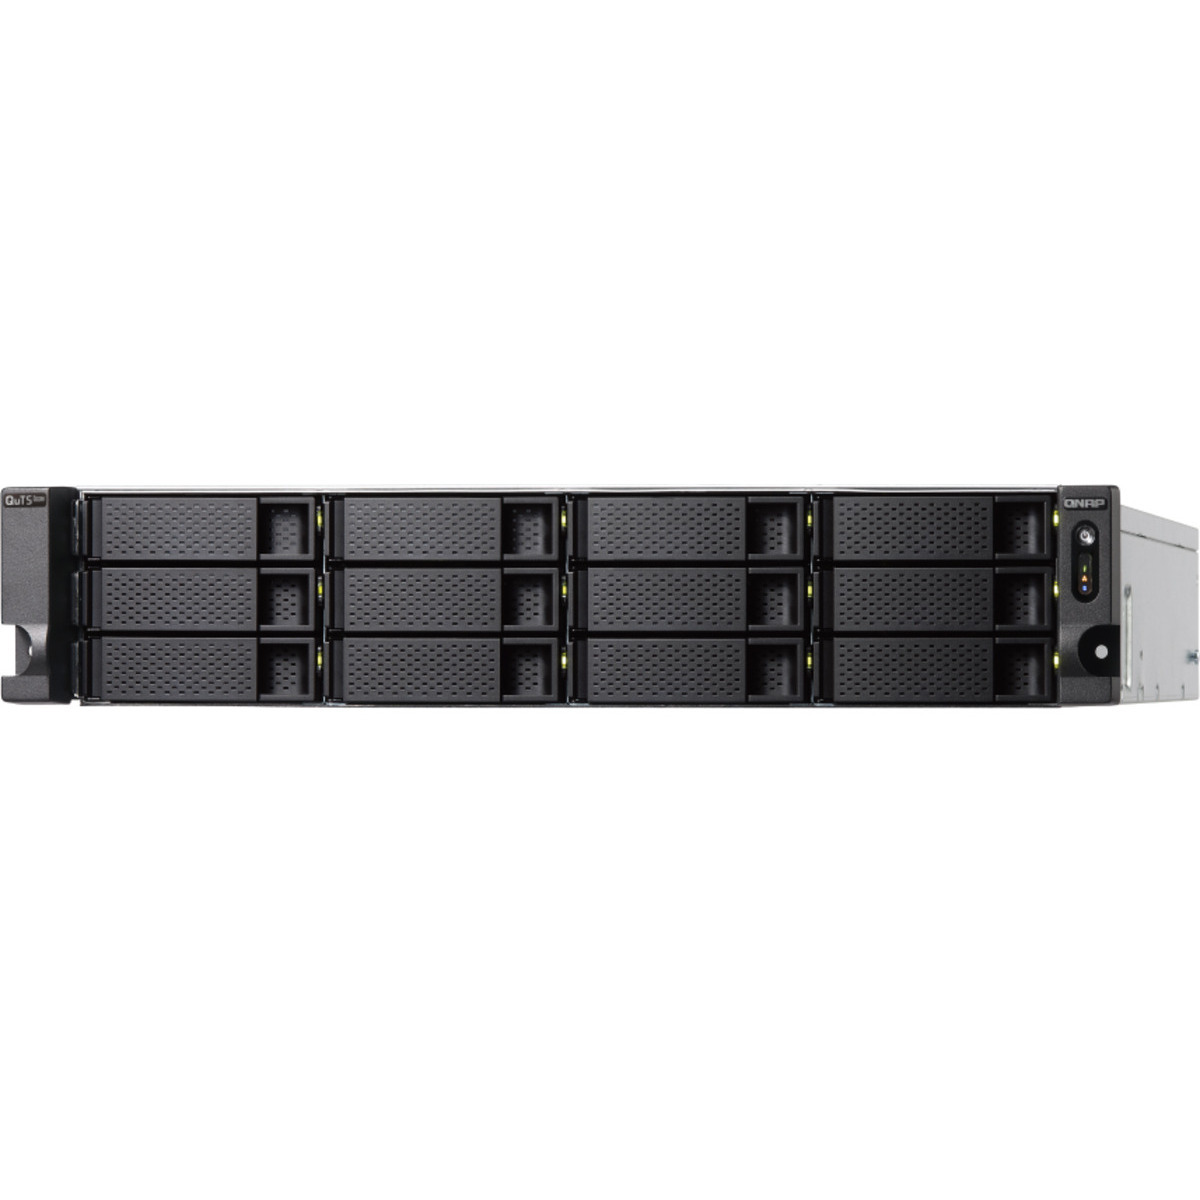 buy QNAP TS-h1886XU-RP R2 QuTS hero Edition 264tb RackMount NAS - Network Attached Storage Device 12x22000gb Western Digital Red Pro WD221KFGX 3.5 7200rpm SATA 6Gb/s HDD NAS Class Drives Installed - Burn-In Tested - nas headquarters buy network attached storage server device das new raid-5 free shipping simply usa TS-h1886XU-RP R2 QuTS hero Edition